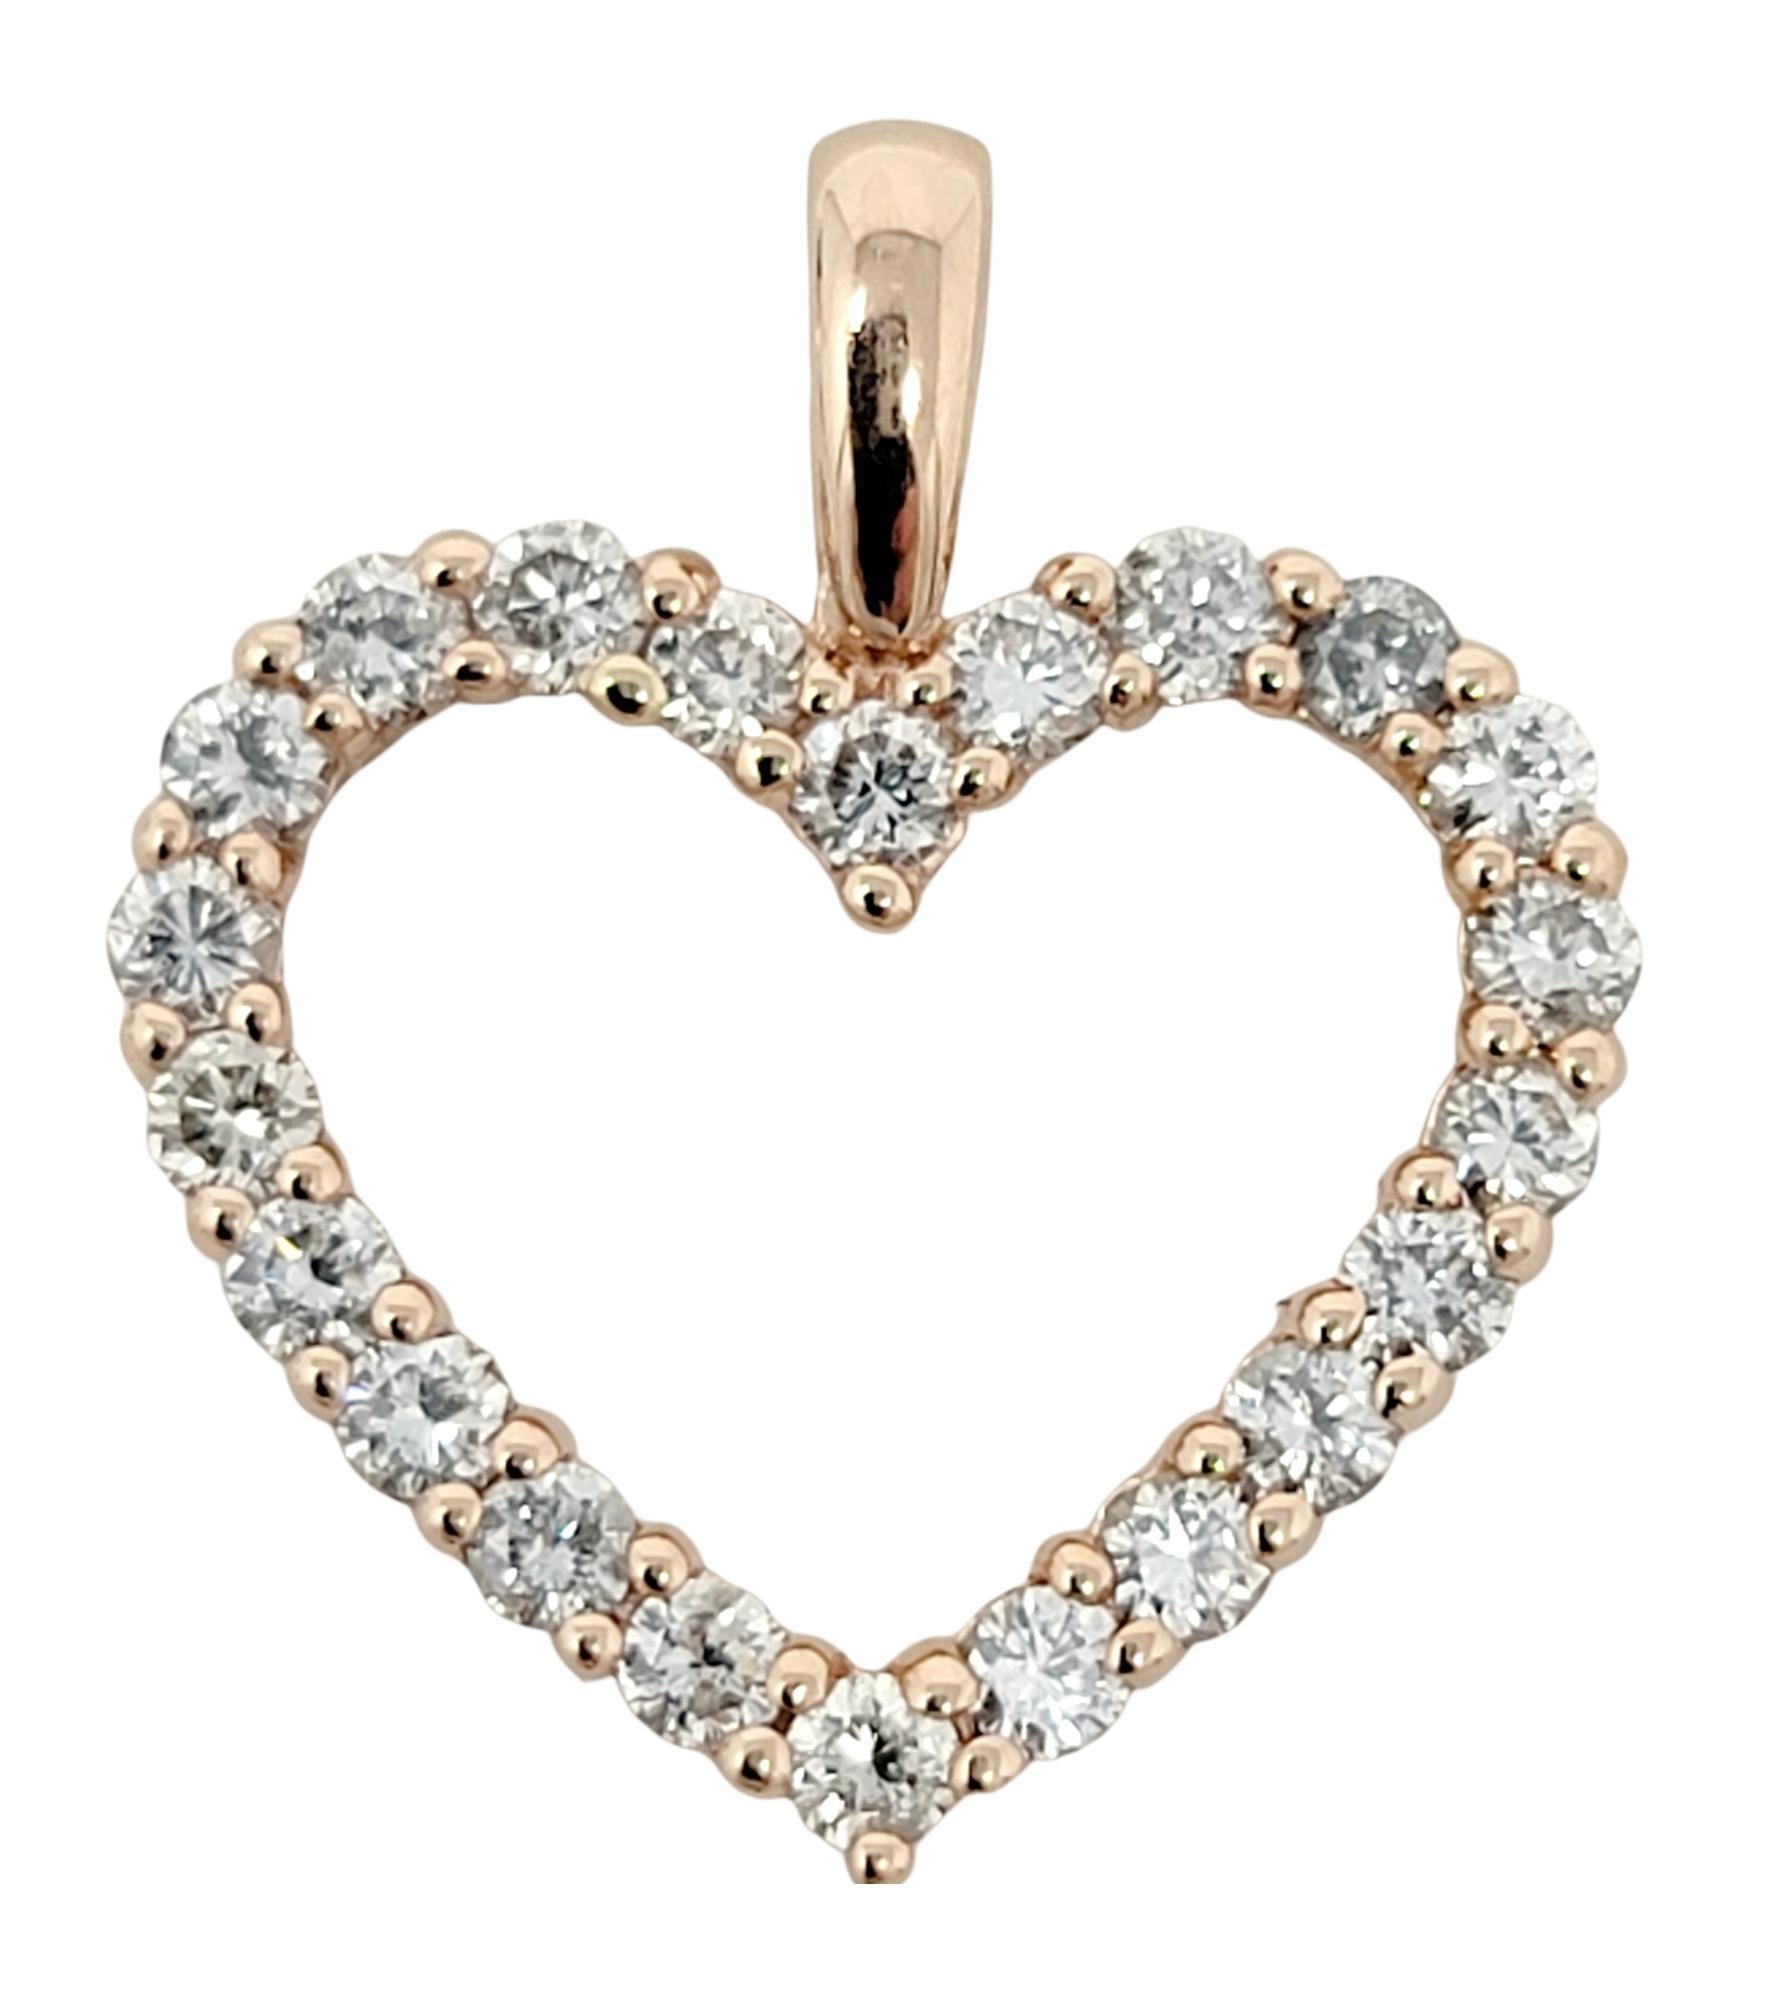 Delicate yet dazzling diamond open heart pendant in 14 karat rose gold. 

*This listing is for the pendant only, no necklace is included. 

Item type: Pendant
Metal: 14K Rose Gold
Weight: 2.10 grams
Diamond cuts: Round Brilliant
Diamond color: